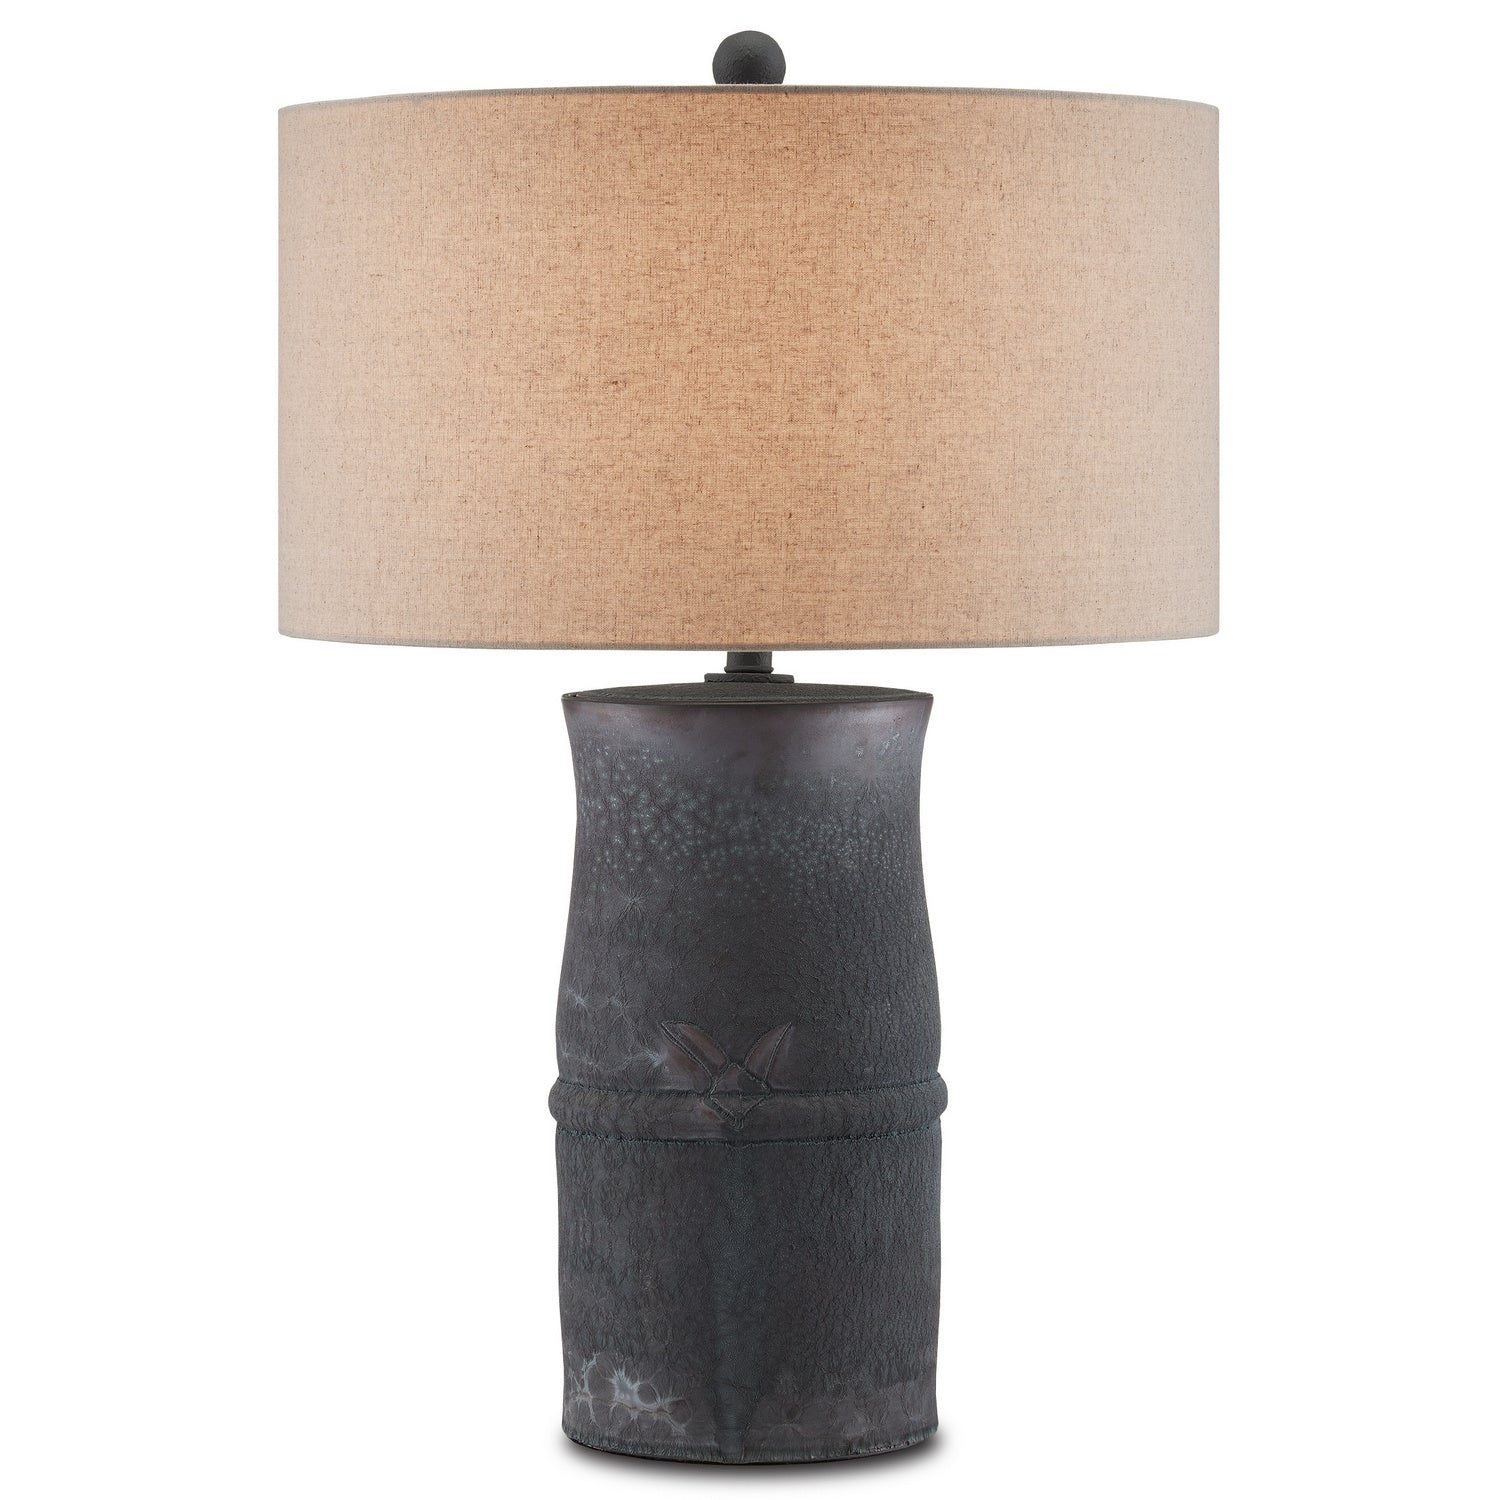 One Light Table Lamp from the Croft collection in Charcoal finish